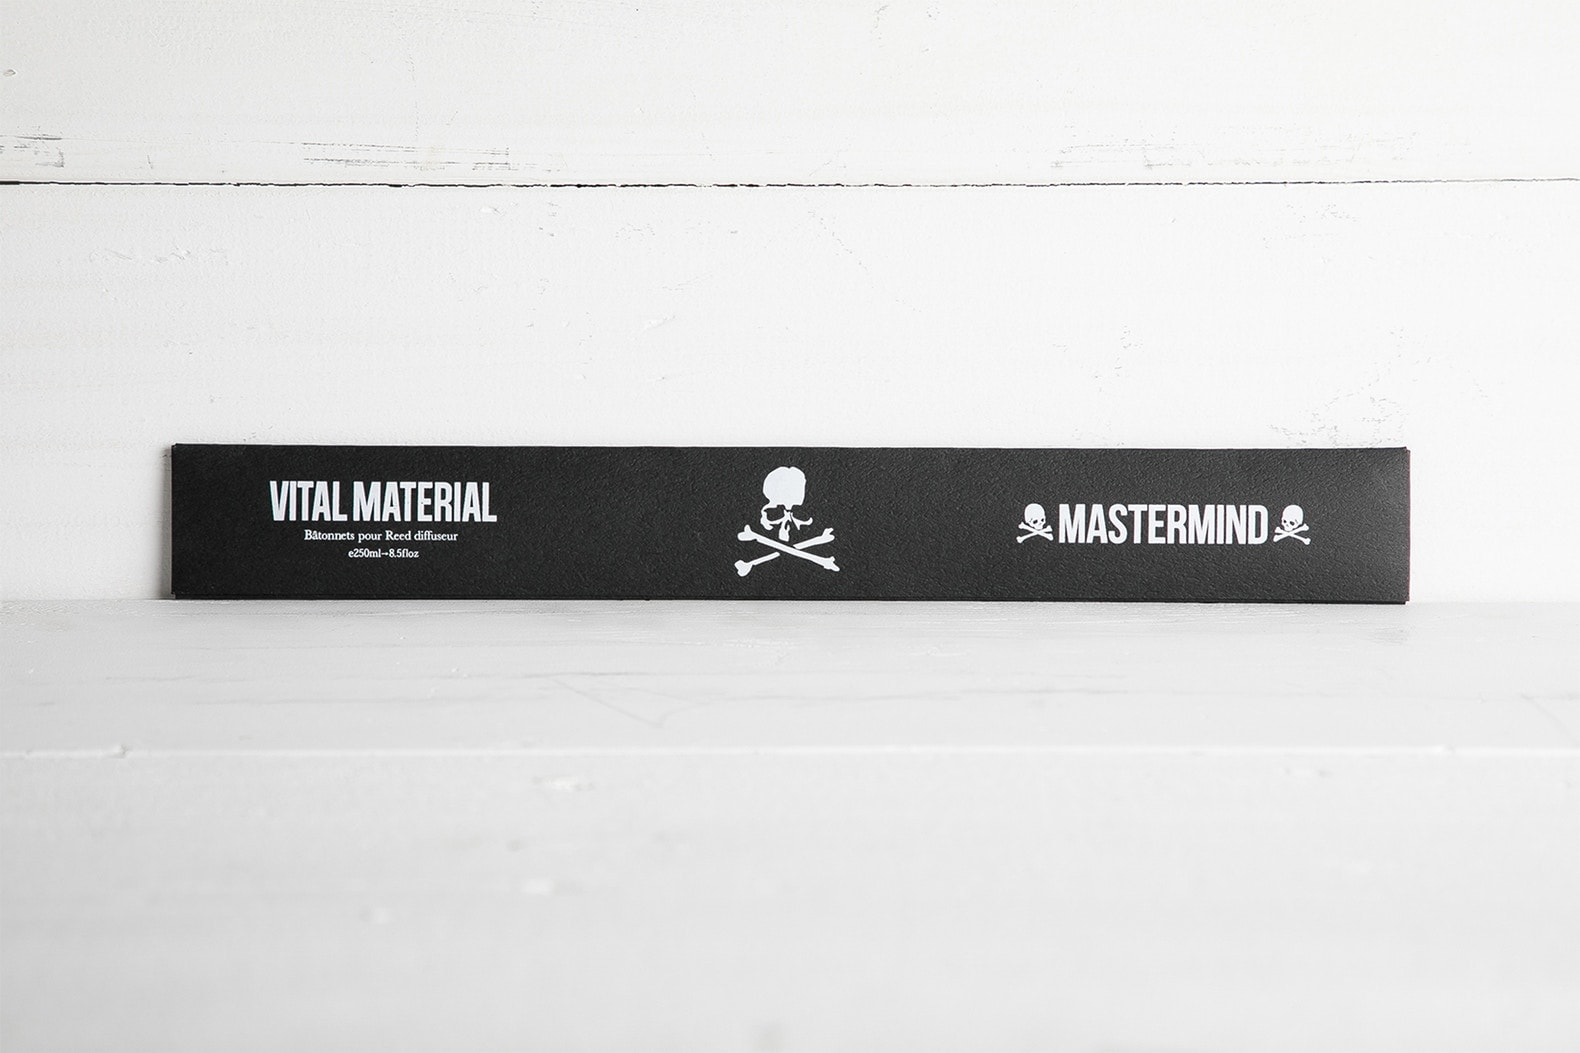 mastermind WORLD & VITAL MATERIAL Reed Diffuser